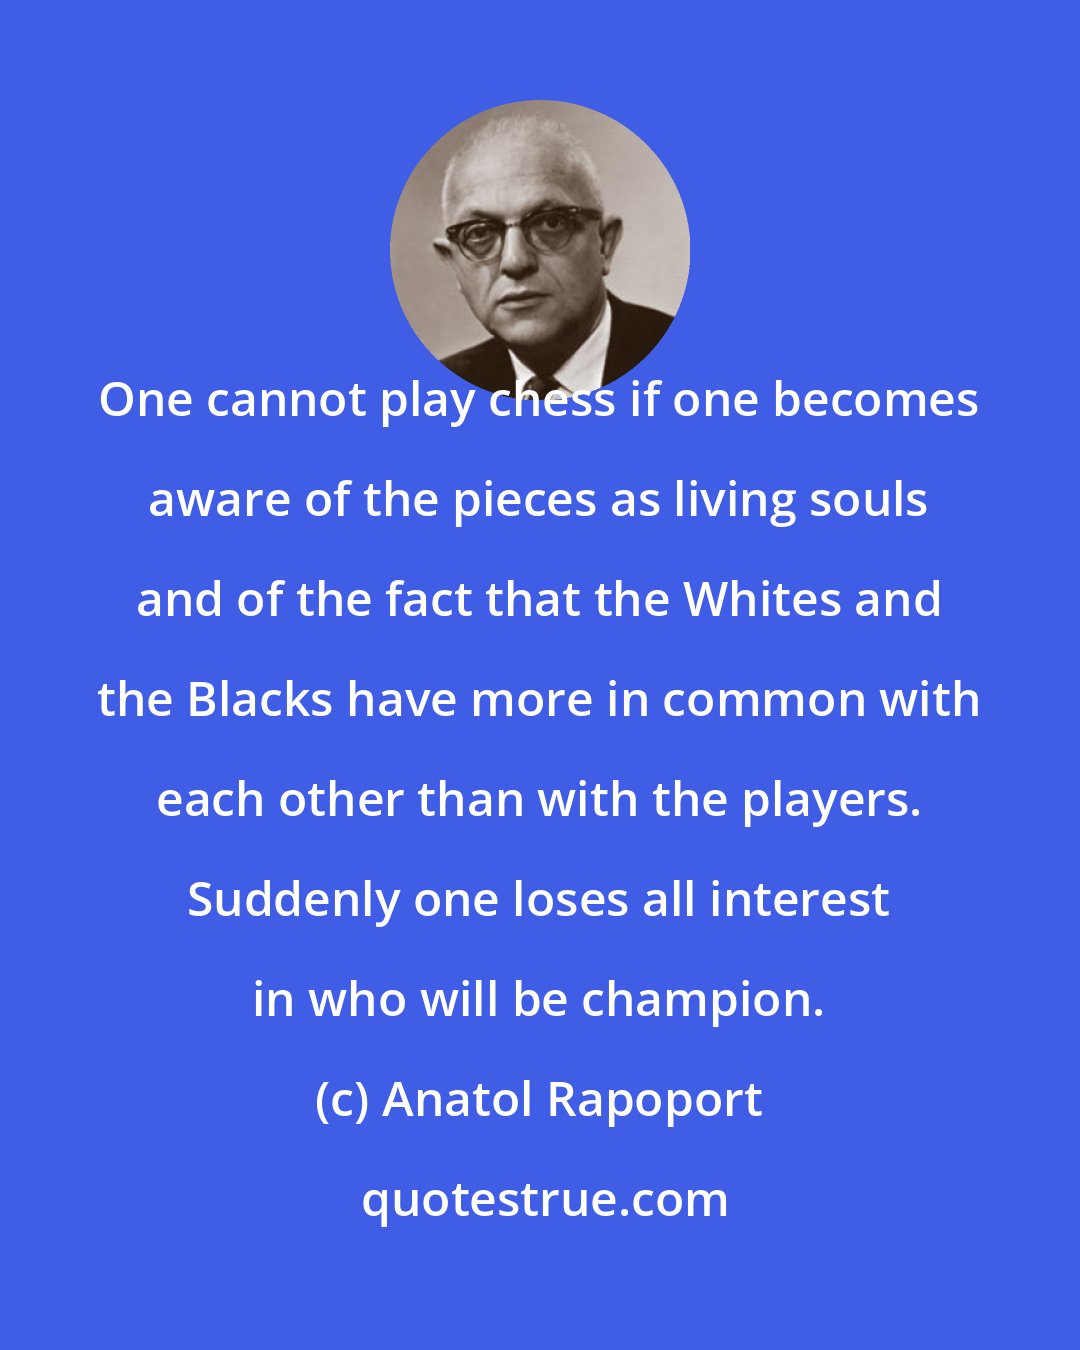 Anatol Rapoport: One cannot play chess if one becomes aware of the pieces as living souls and of the fact that the Whites and the Blacks have more in common with each other than with the players. Suddenly one loses all interest in who will be champion.